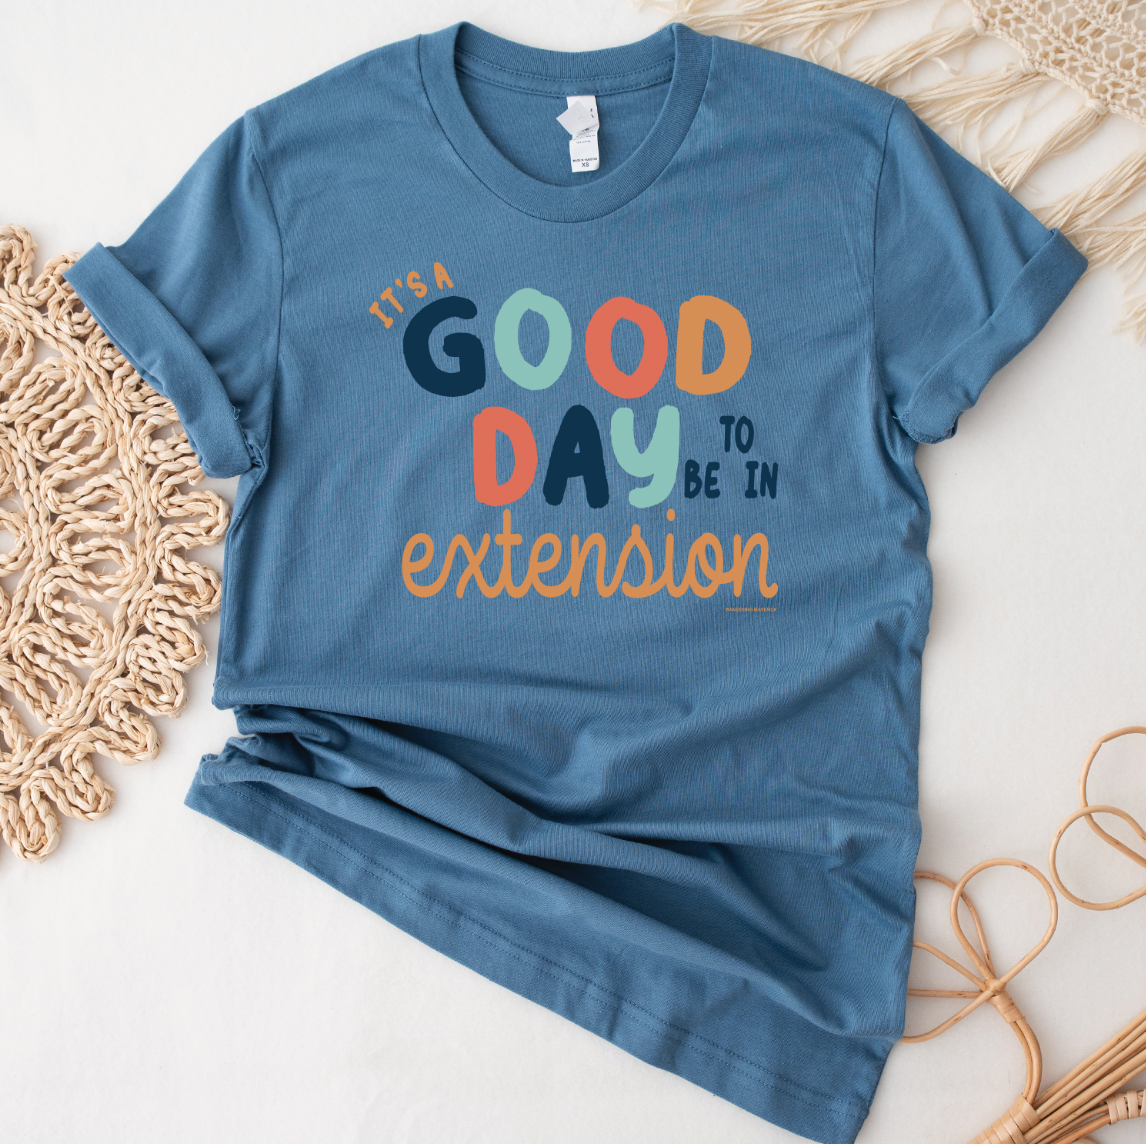 It's A Good Day To Be In Extension T-Shirt (XS-4XL) - Multiple Colors!